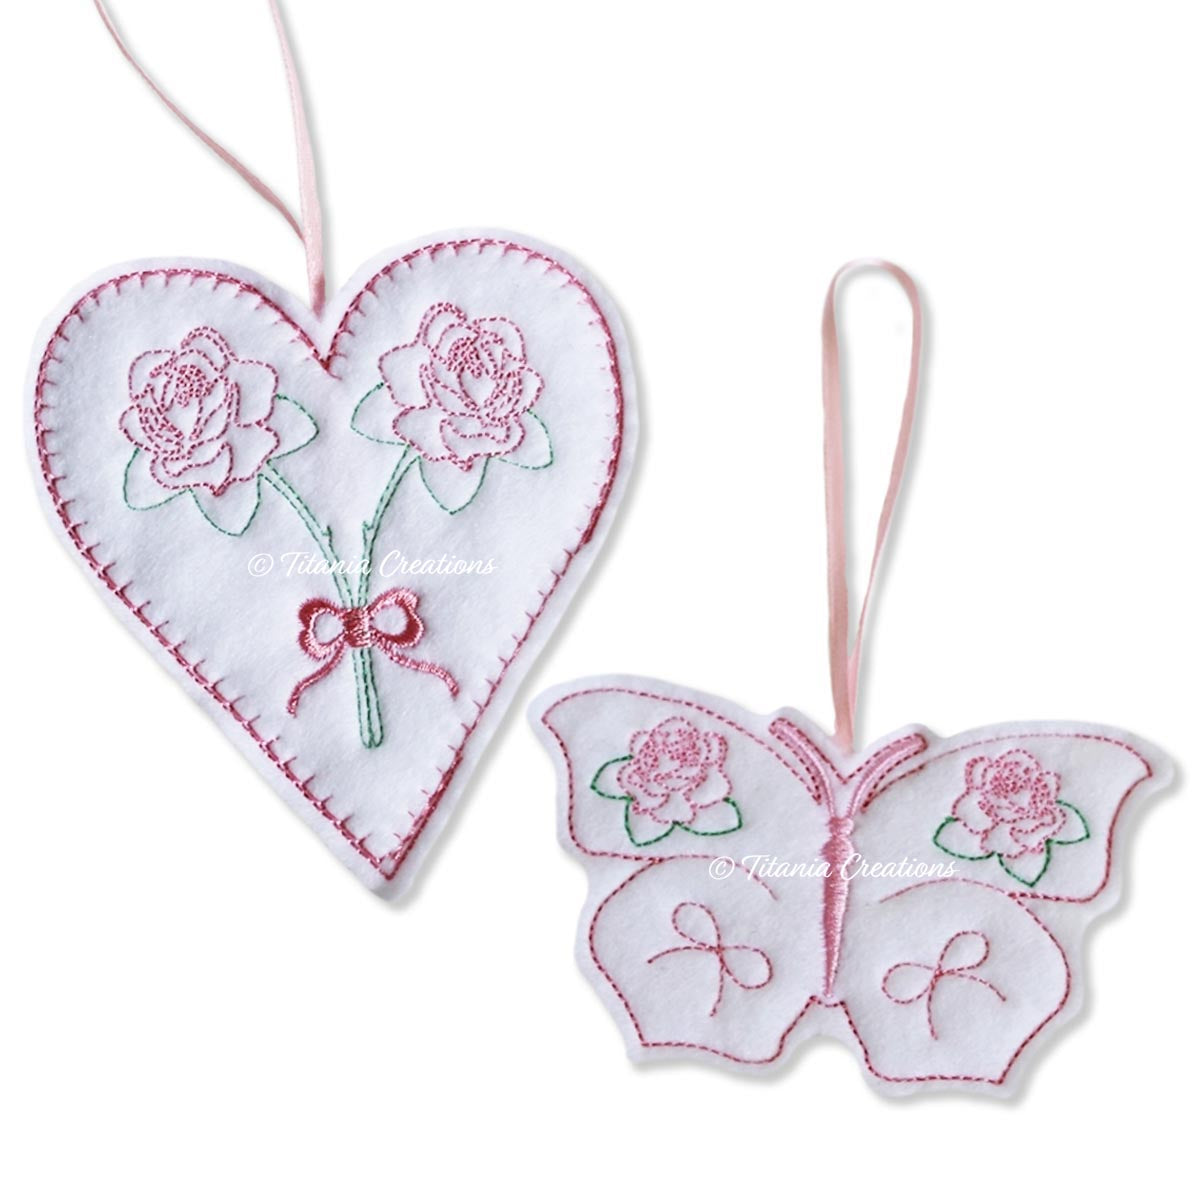 ITH Rose Heart and Butterfly Lavender Bags 4x4